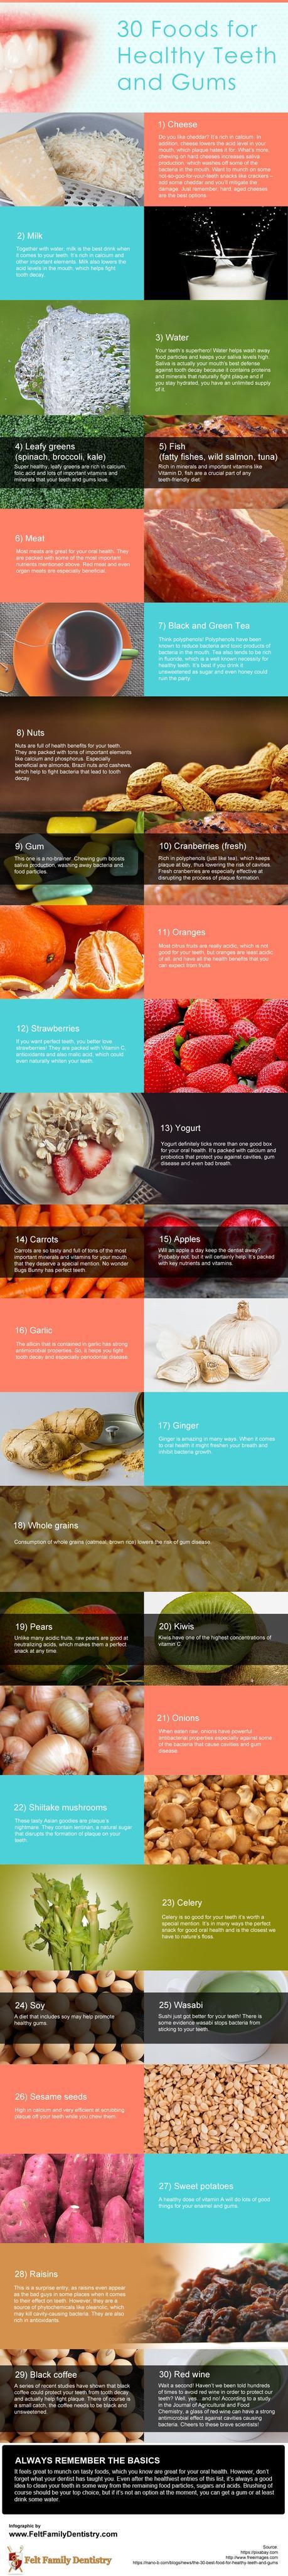 30-foods-for-healthy-teeth-and-gums-min